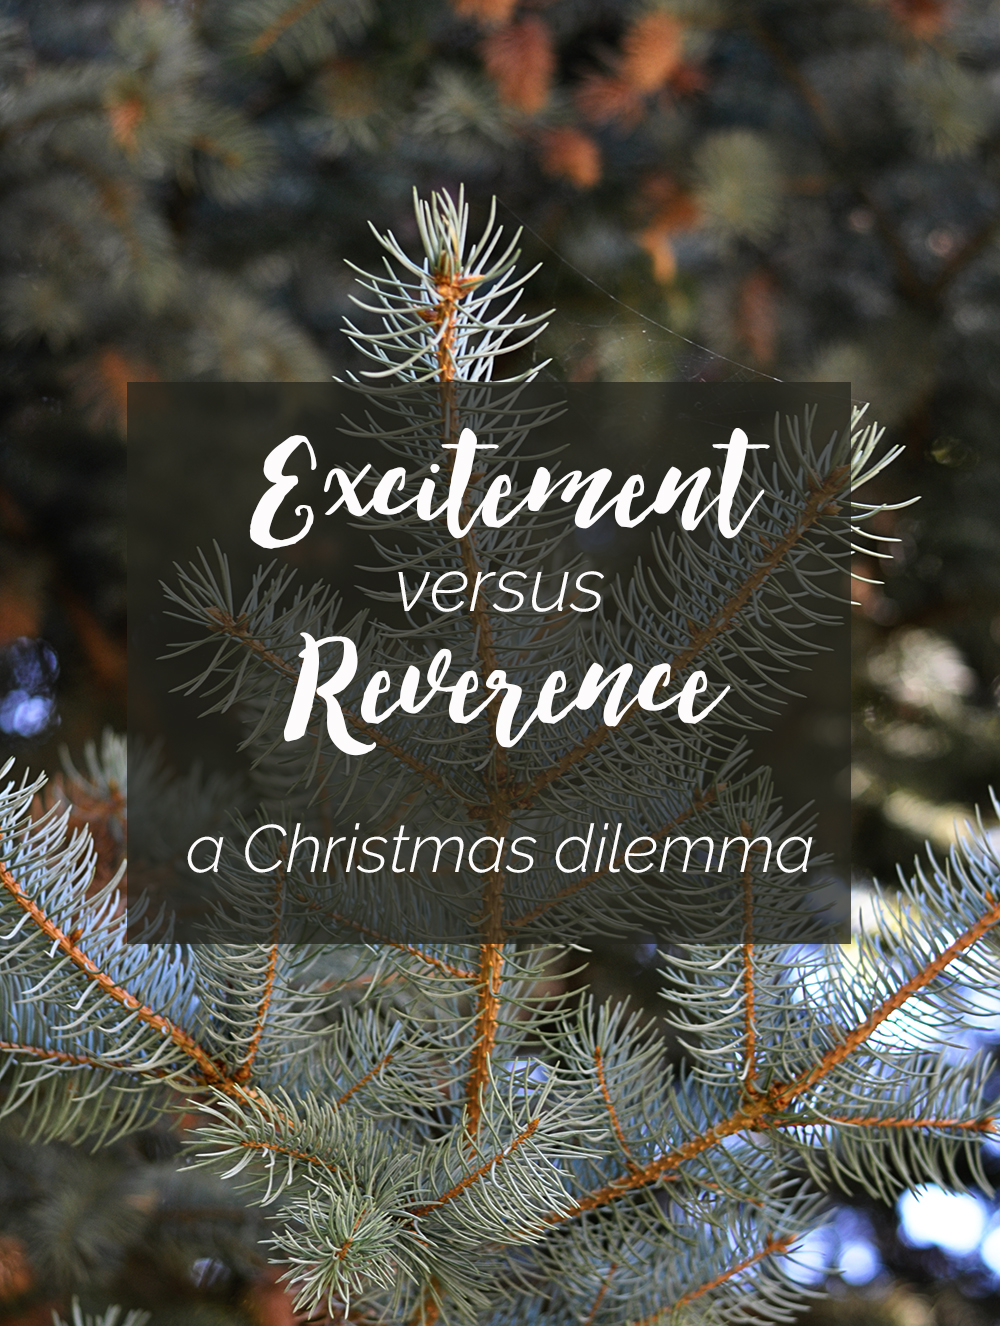 Excitement vs Reverence: A Christmas Dilemma